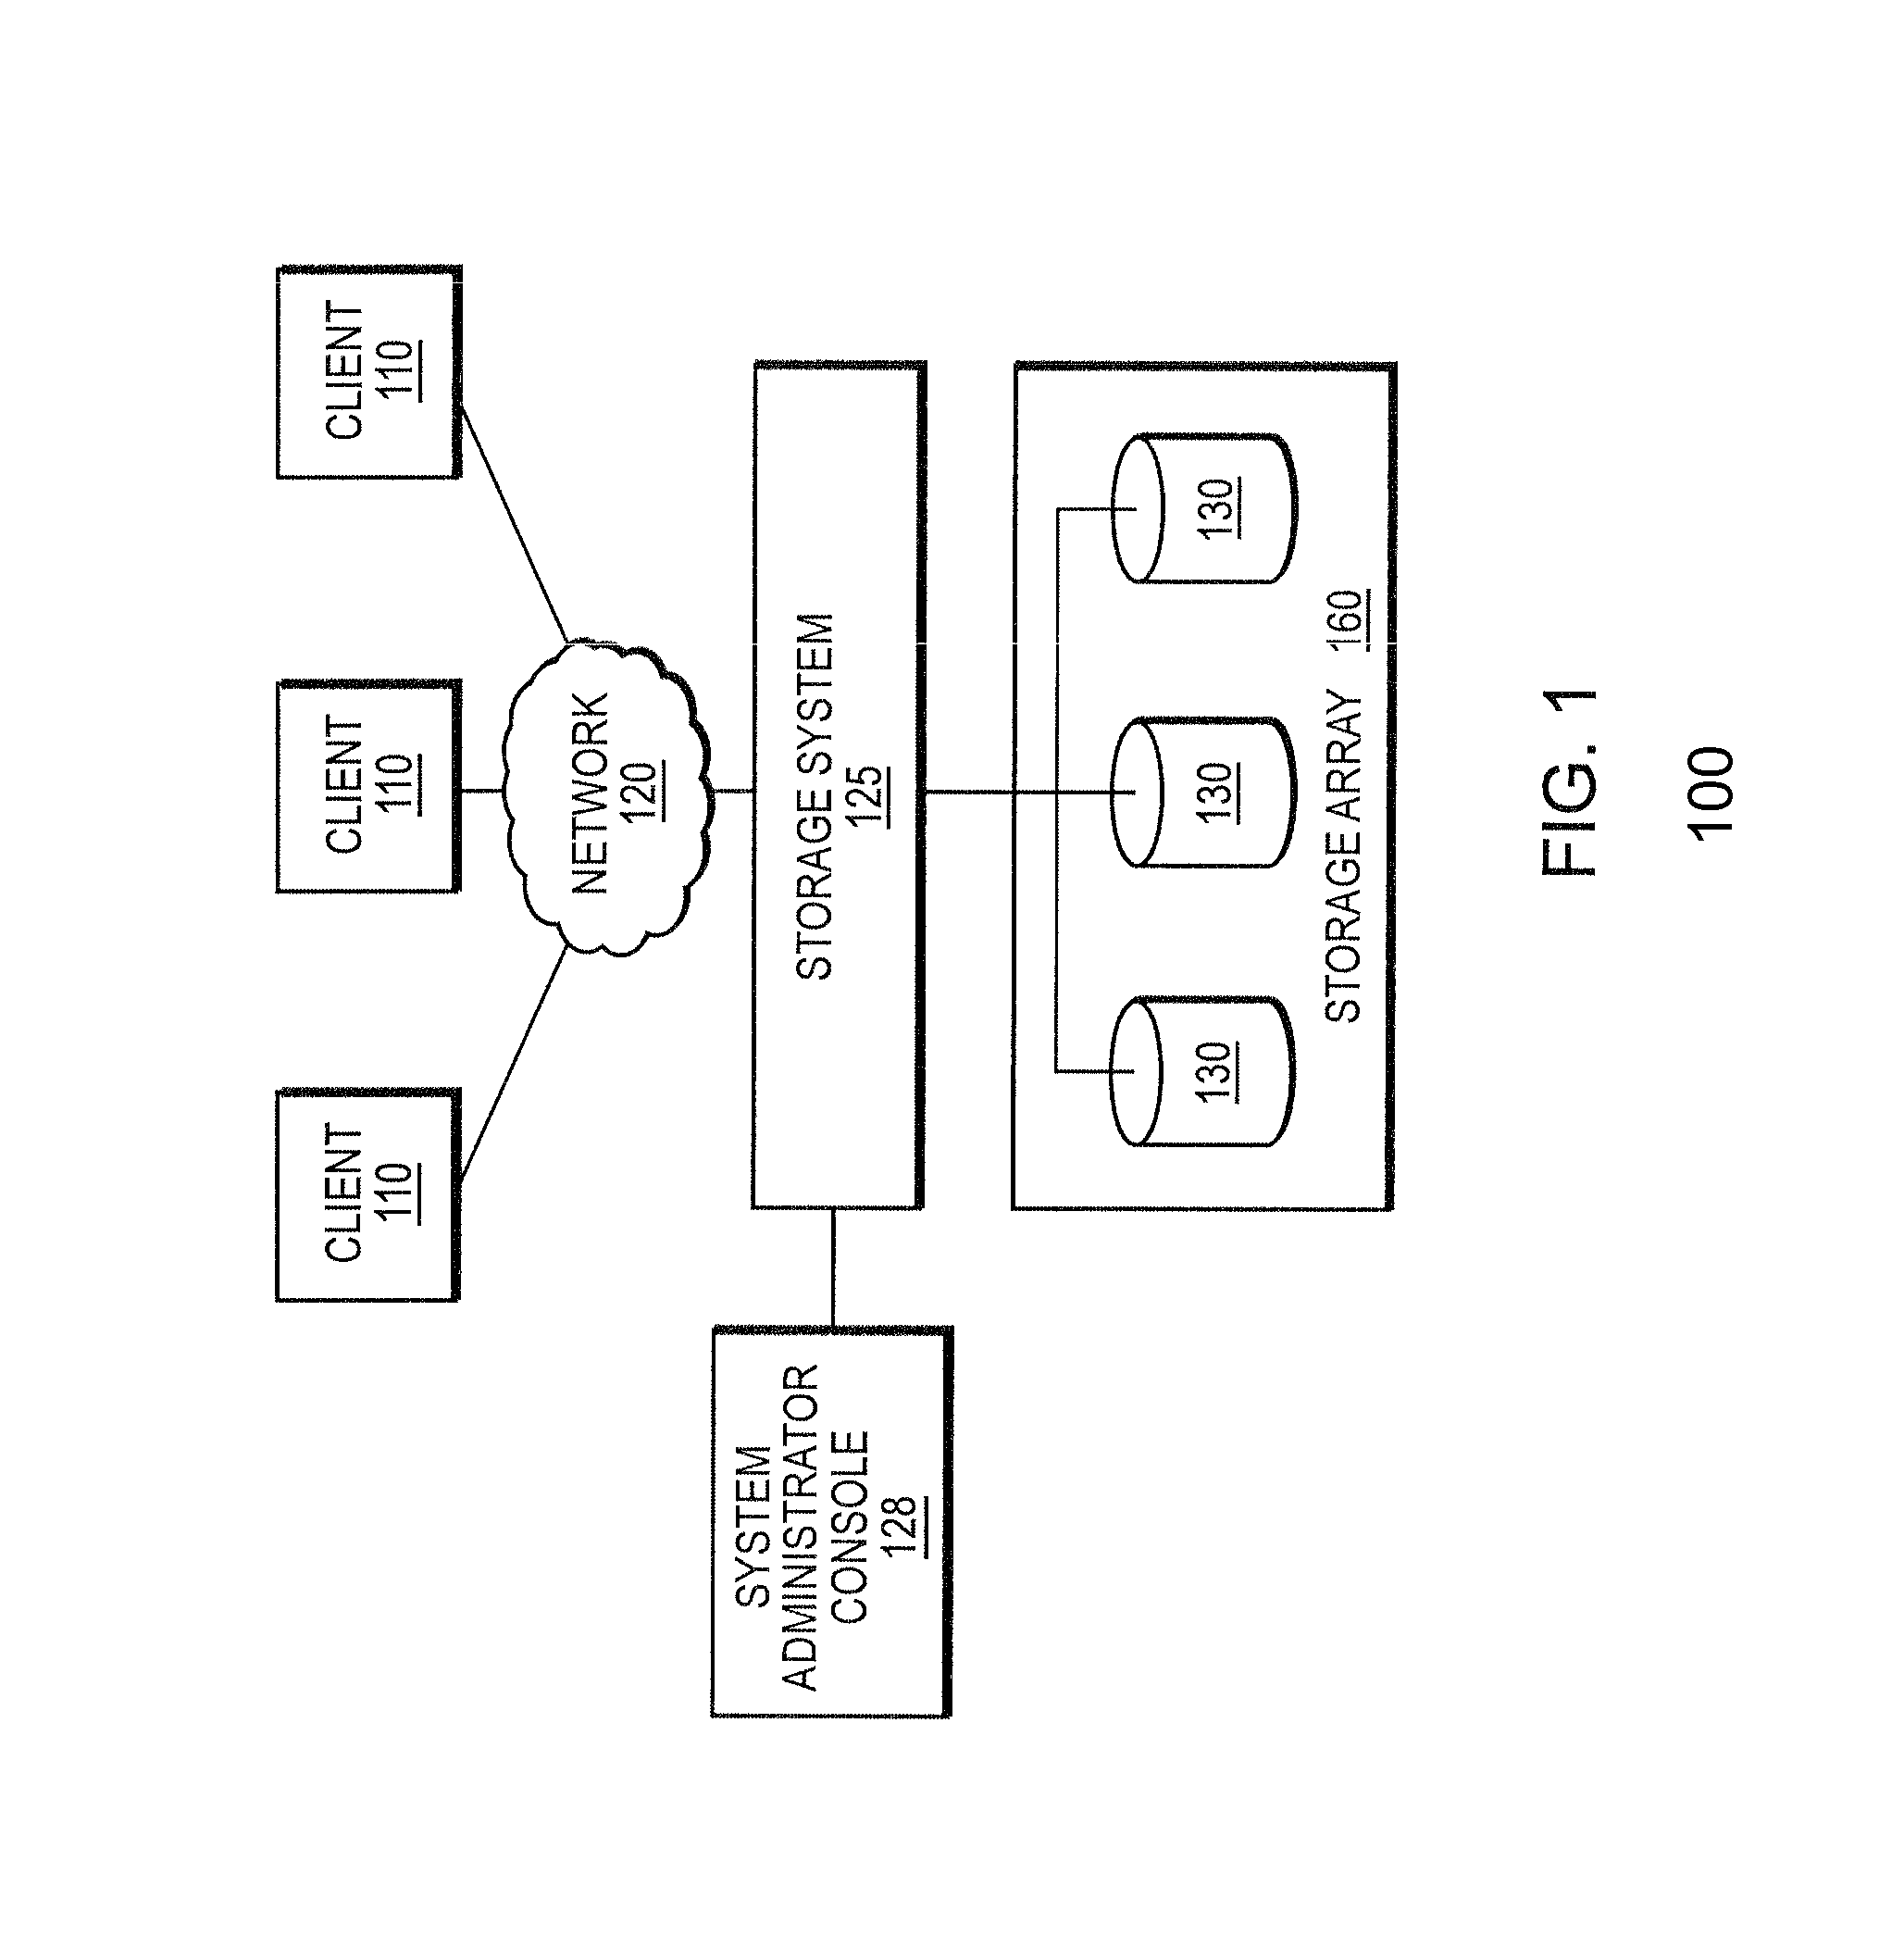 Two-dimensional indexes for quick multiple attribute search in a catalog system